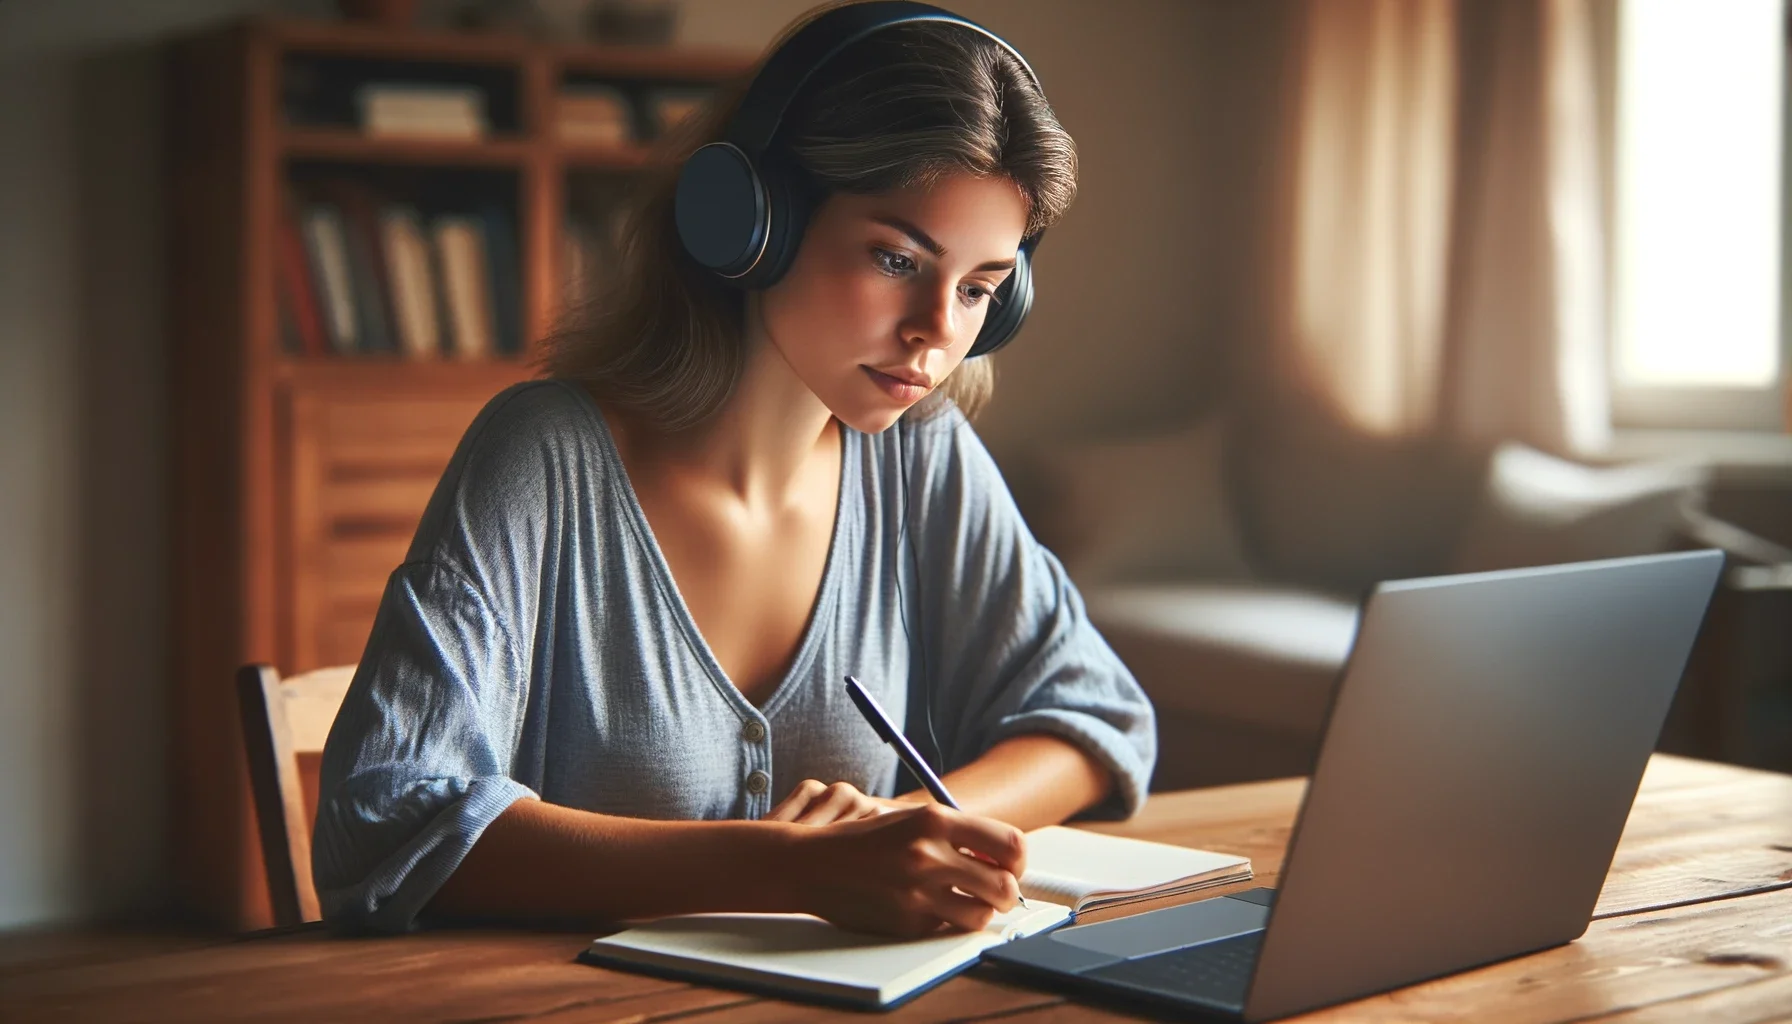 Online Learning with headphones